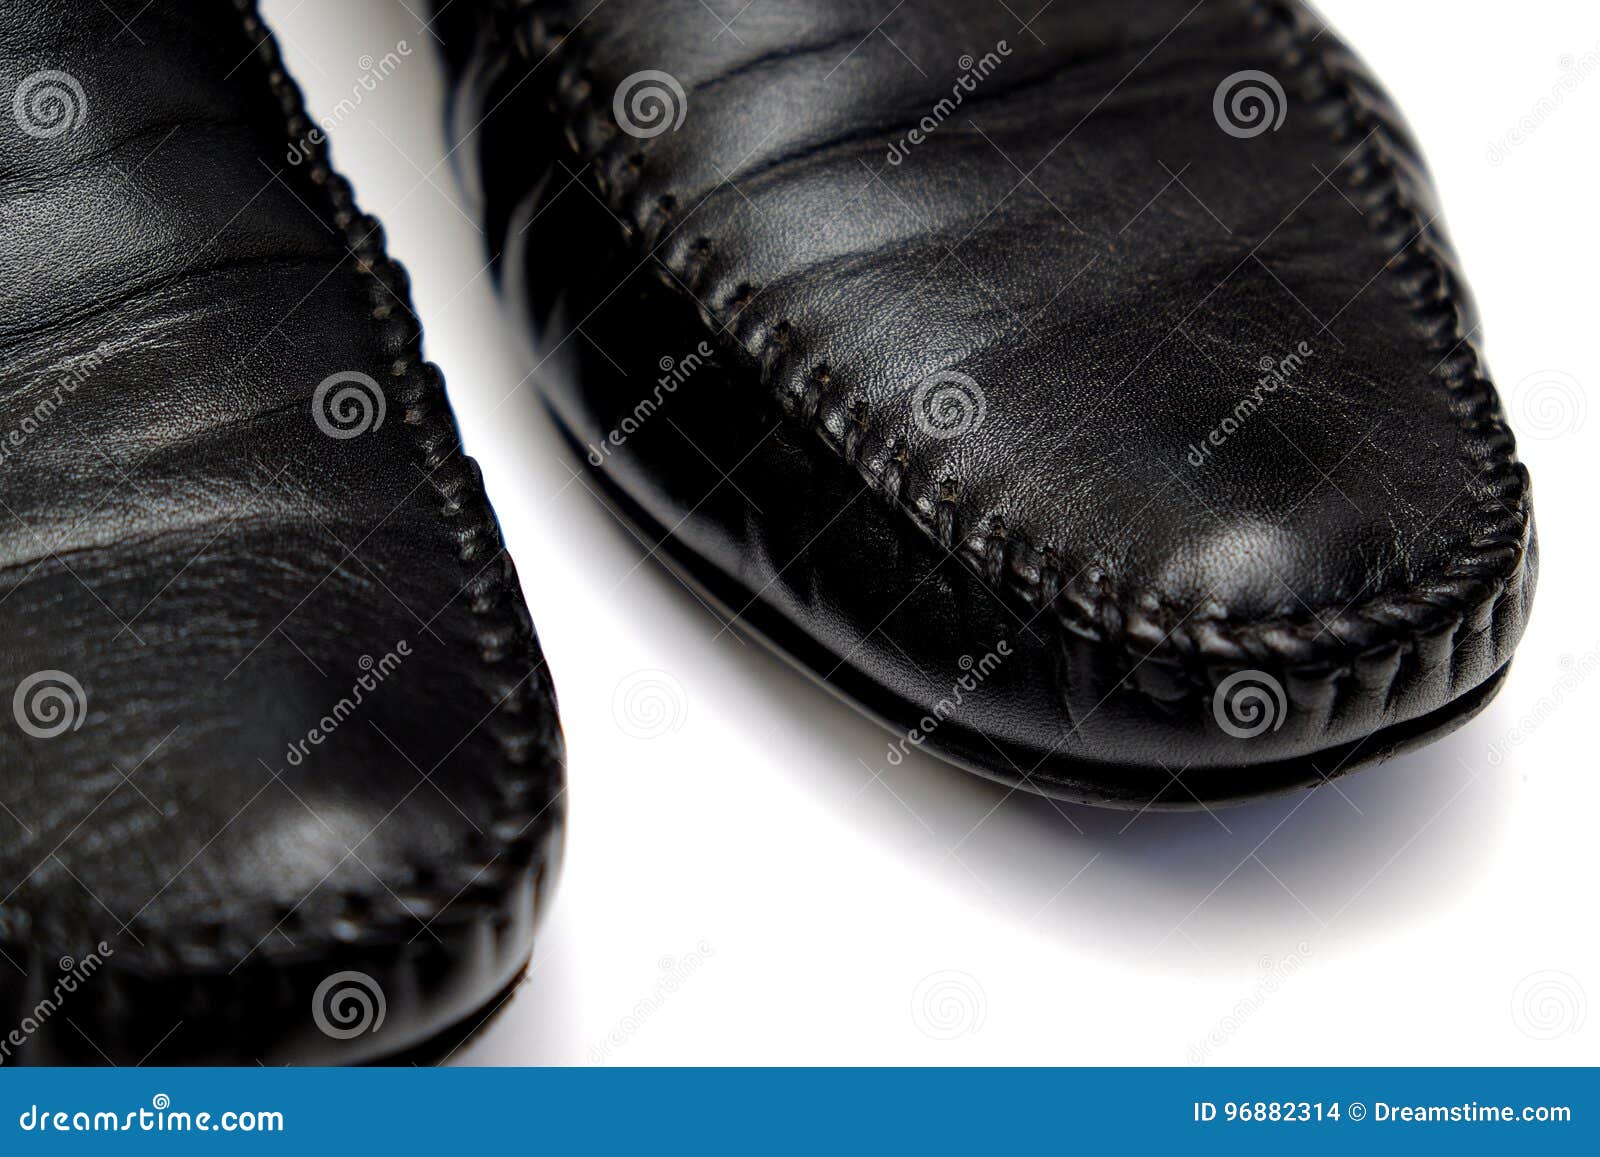 Black leather stock photo. Image of glossy, leather, style - 96882314